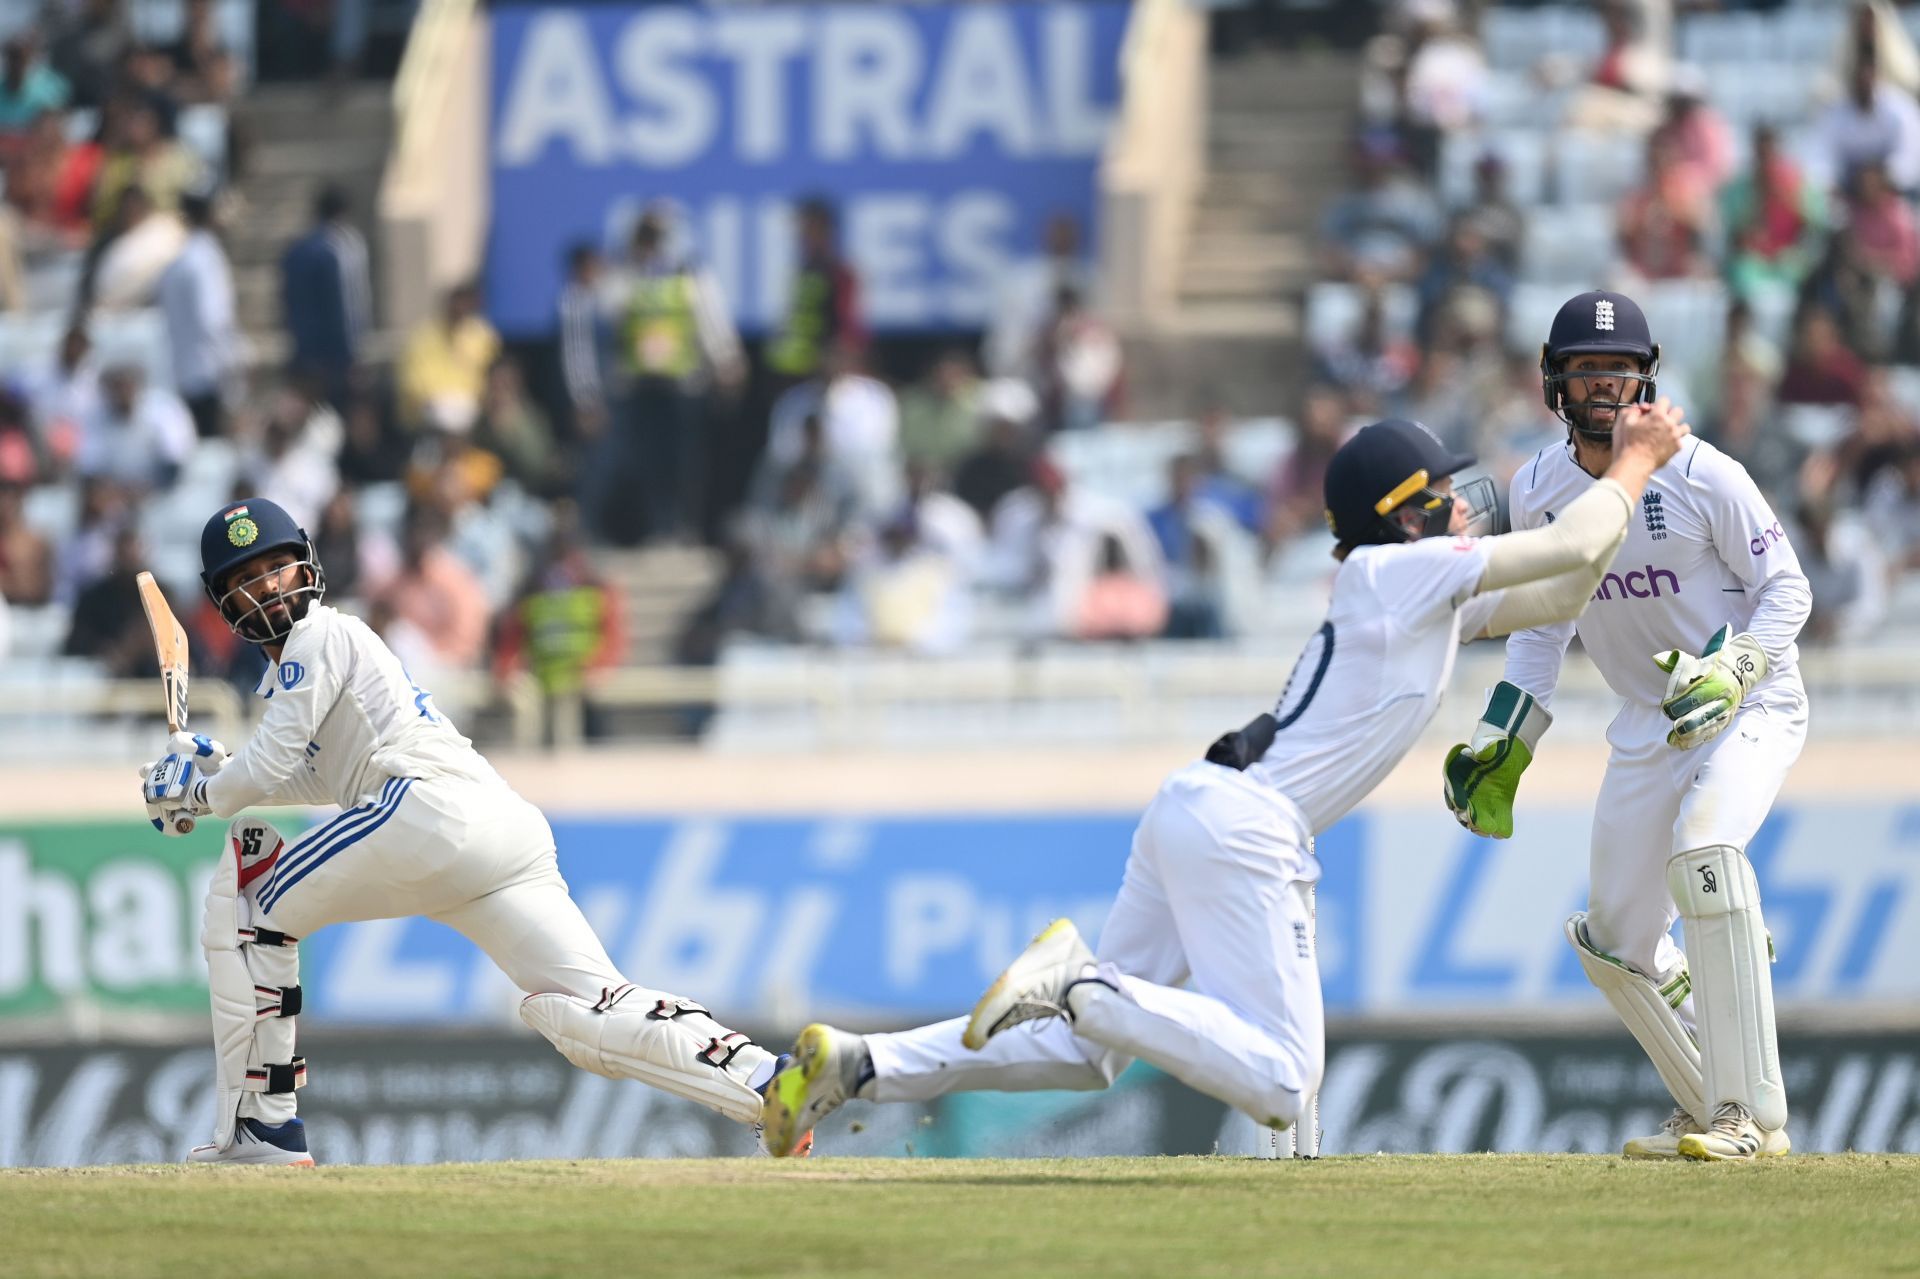 Rajat Patidar has struggled to make an impact. (Pic: Getty Images)